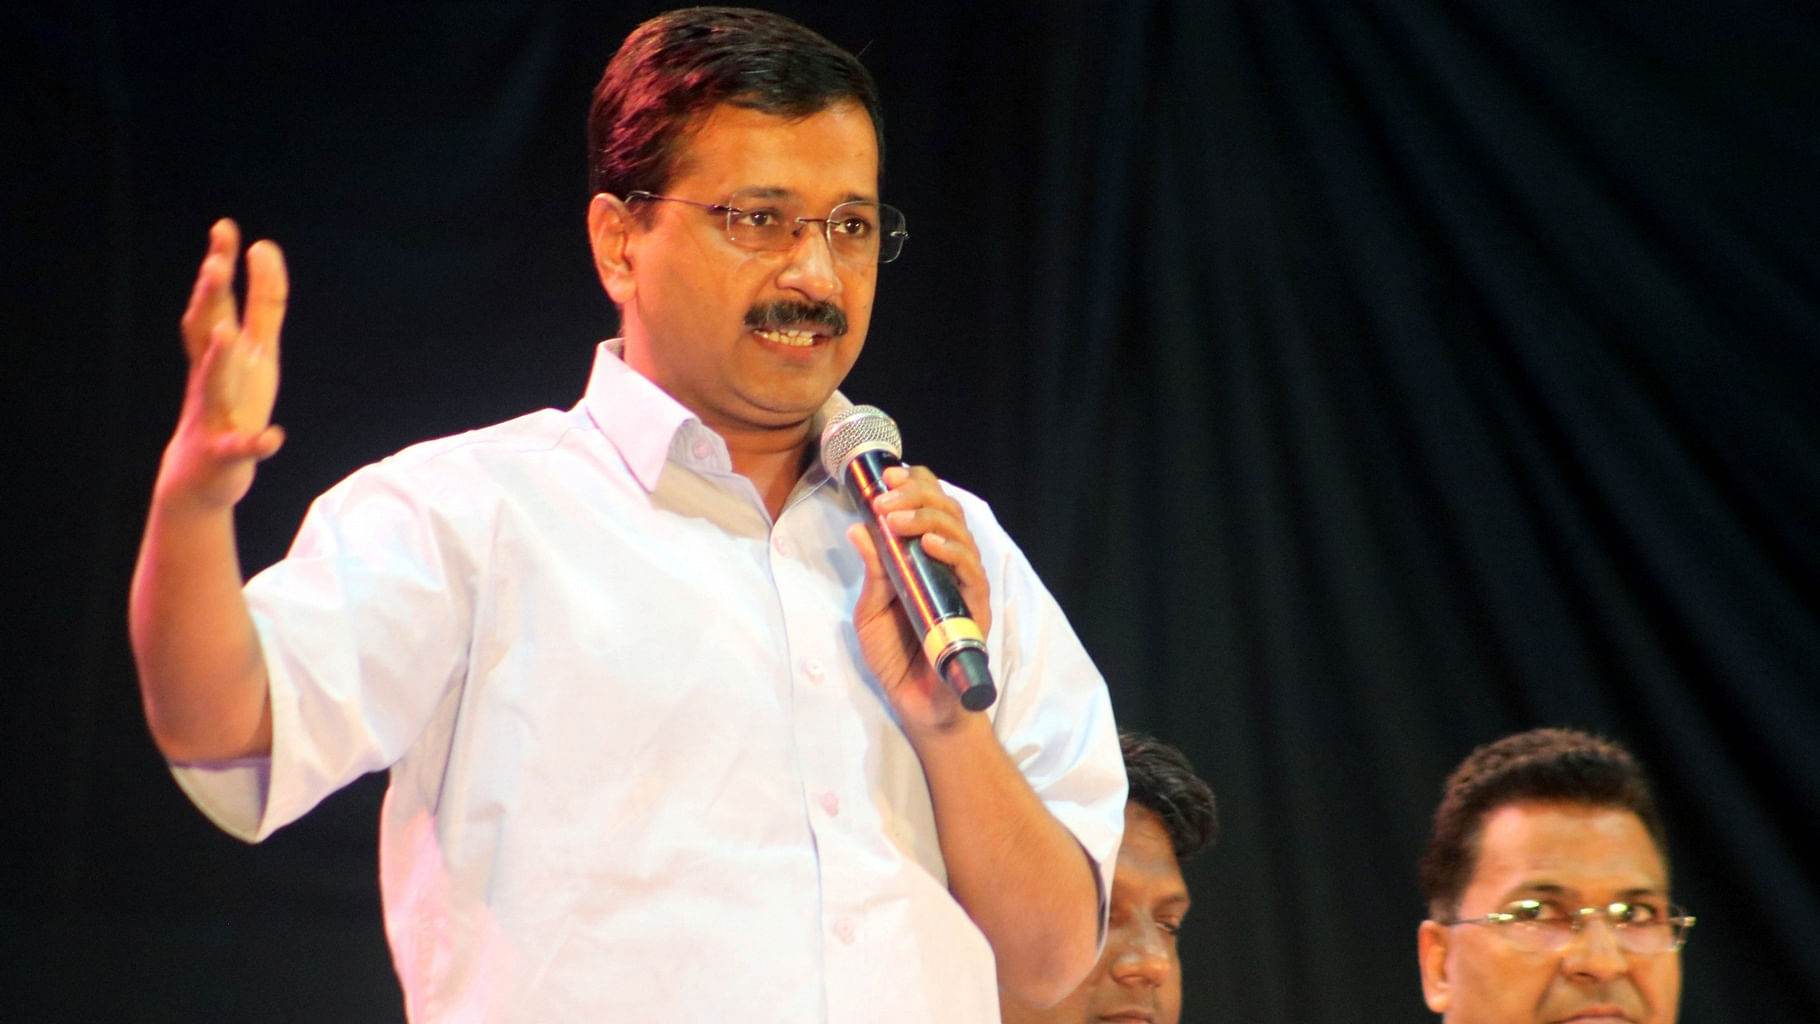 Arvind Kejriwal took a dig at Narendra Modi, asking whether Ambedkar’s dreams would be fulfilled by garlanding his portraits. (Photo: IANS)